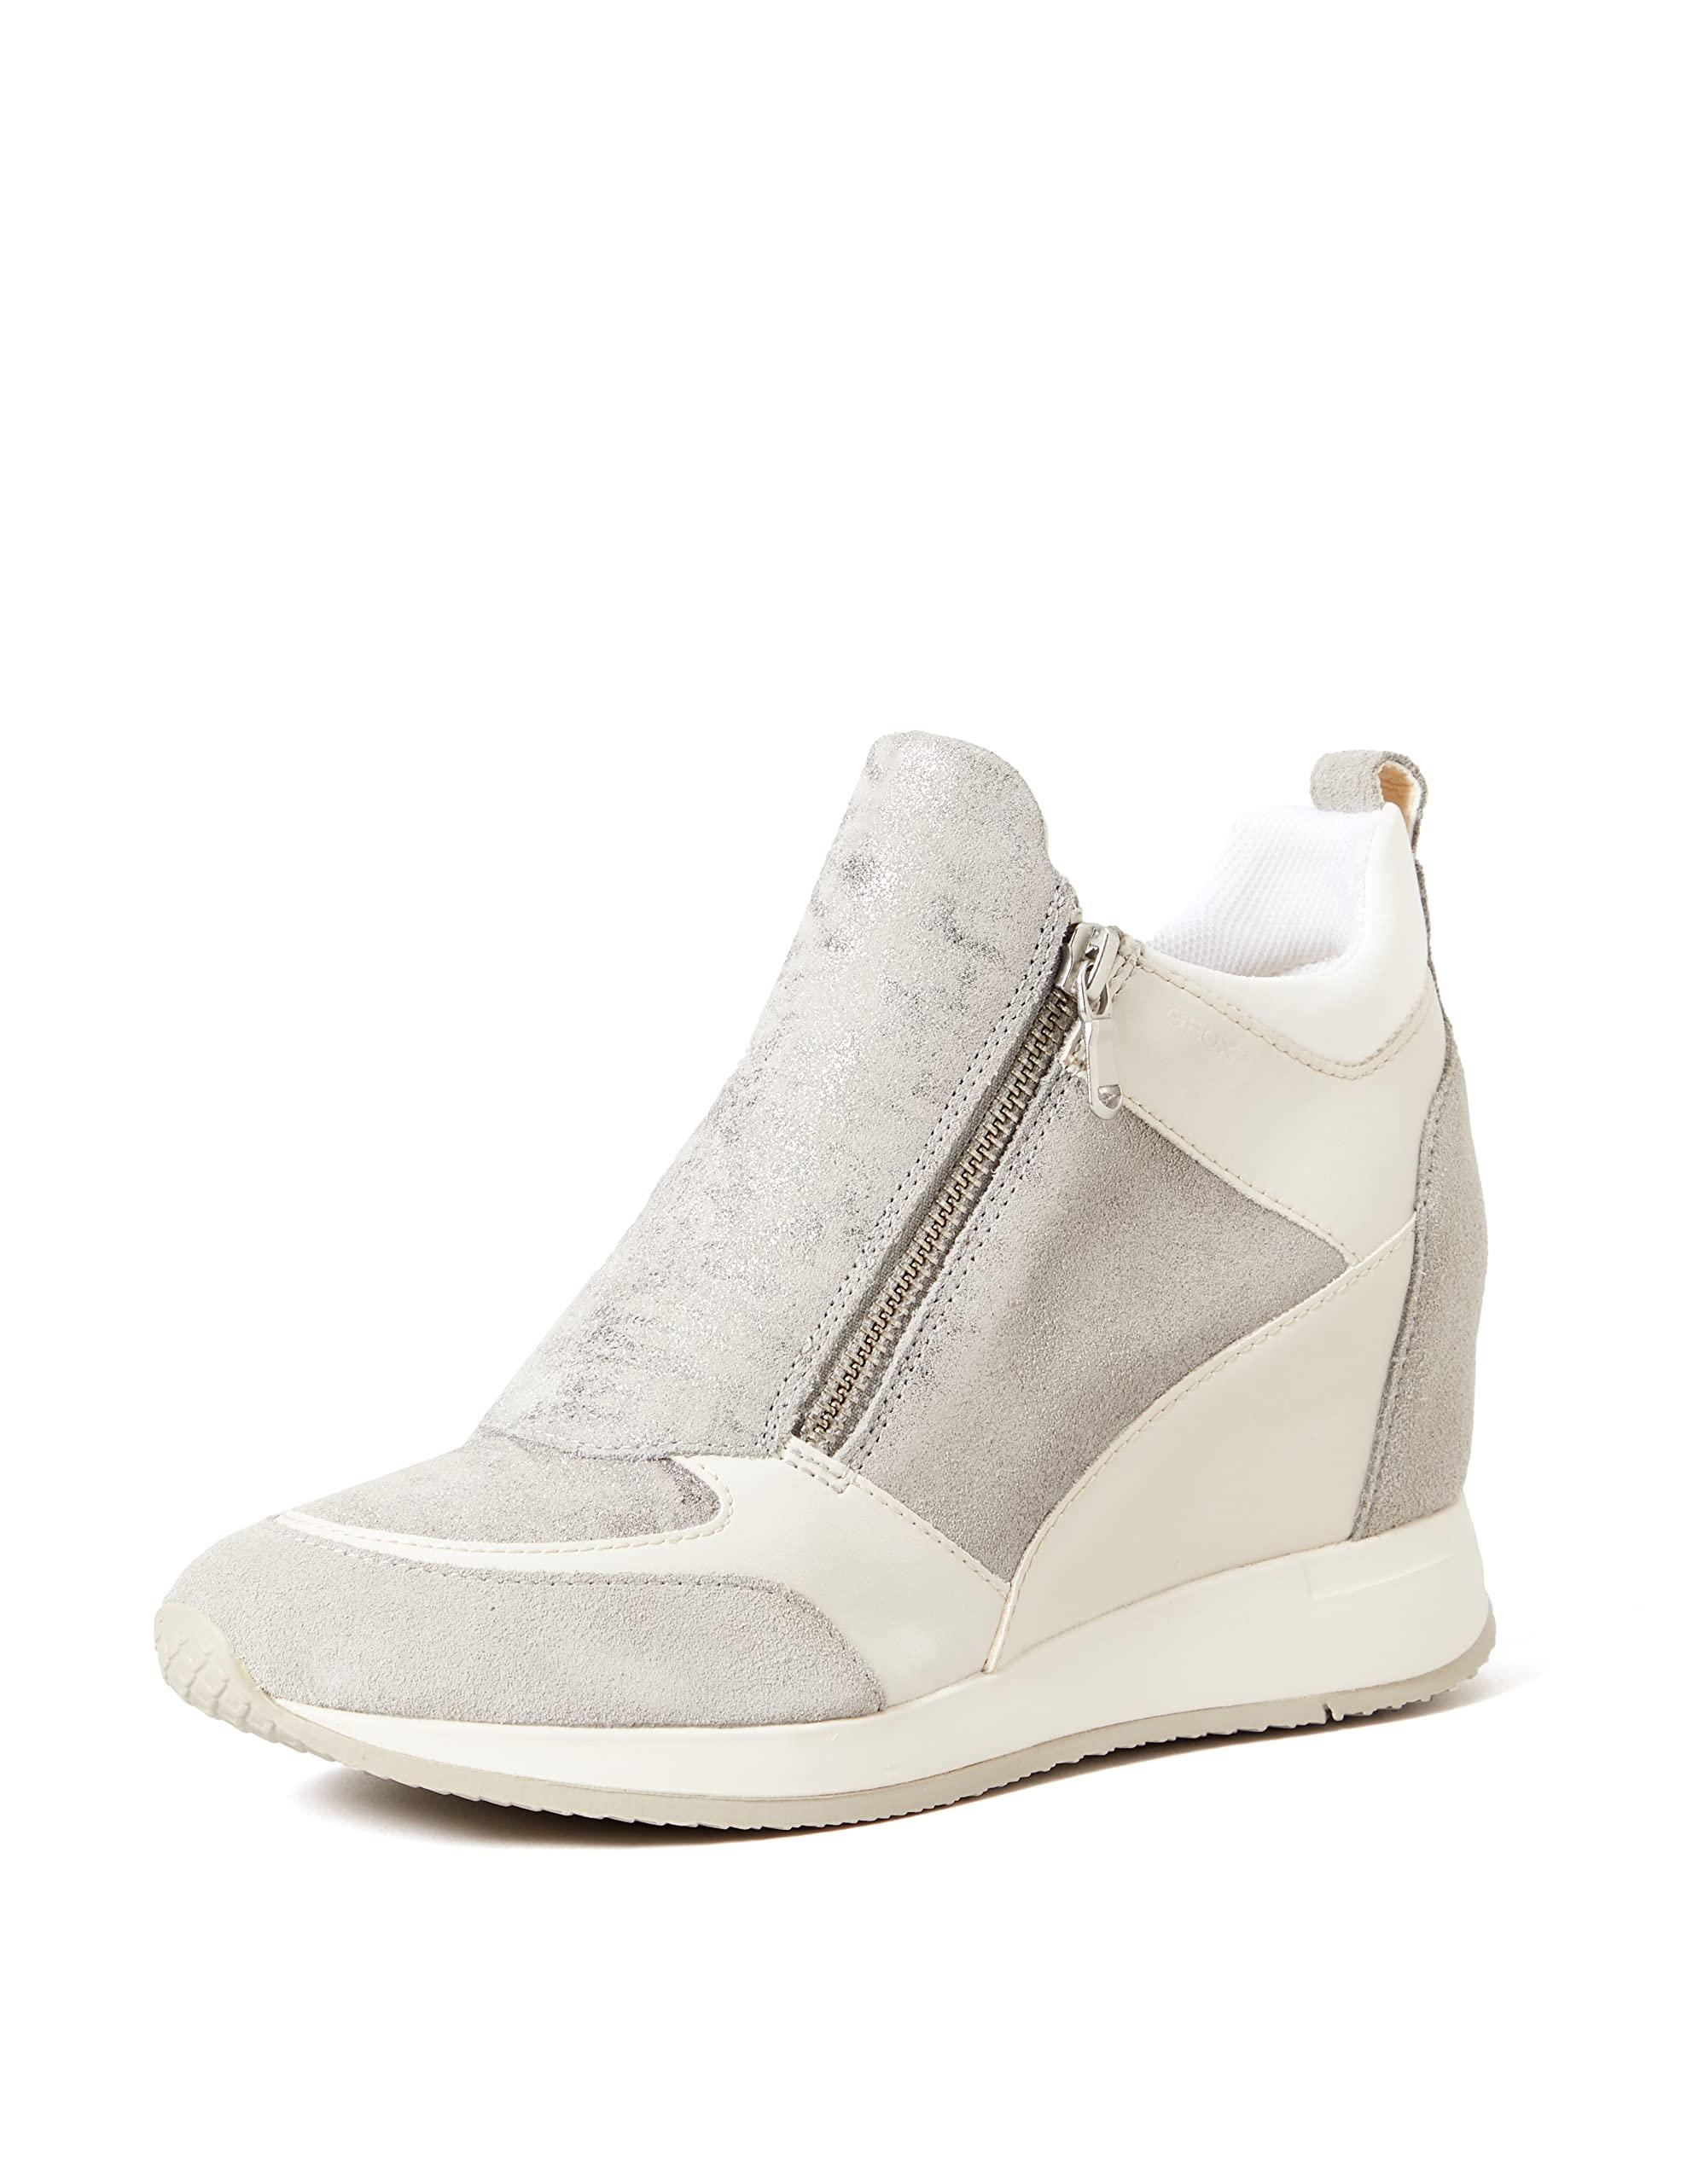 Geox D Nydame Sneakers in White | Lyst UK